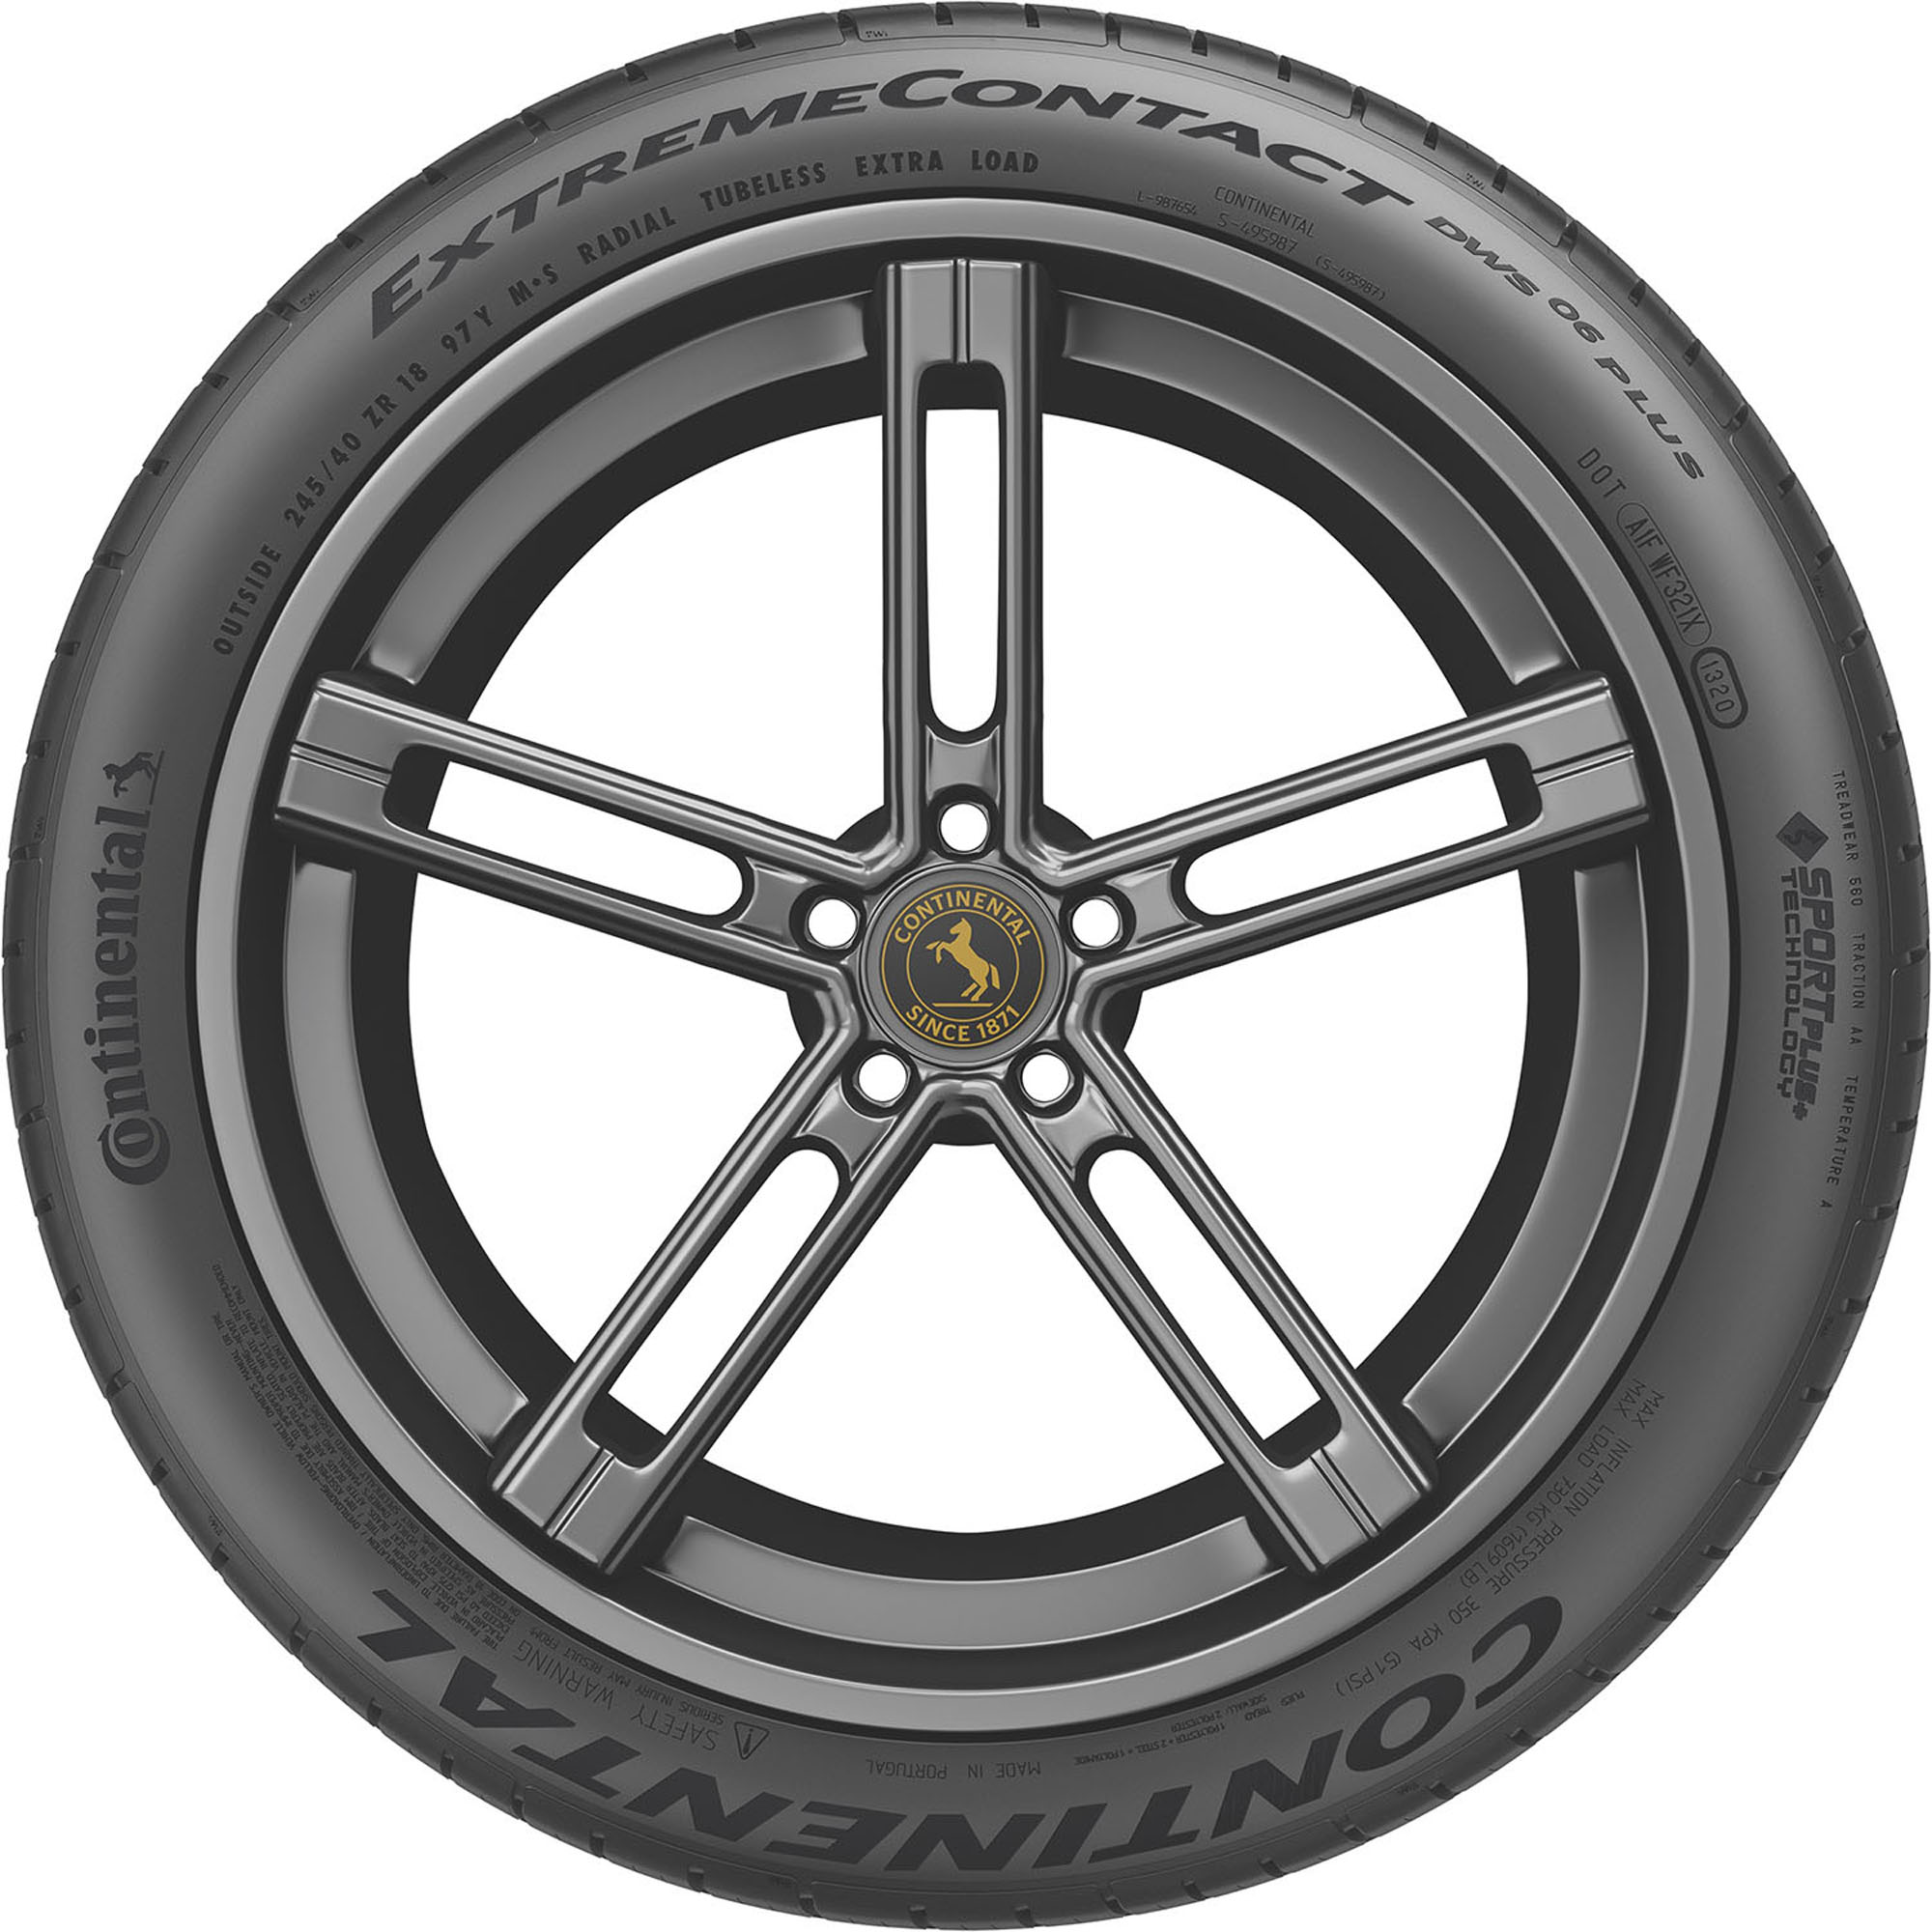 Continental ExtremeContact DWS06 PLUS All Season 275/35ZR20 102Y XL Passenger Tire - image 2 of 6